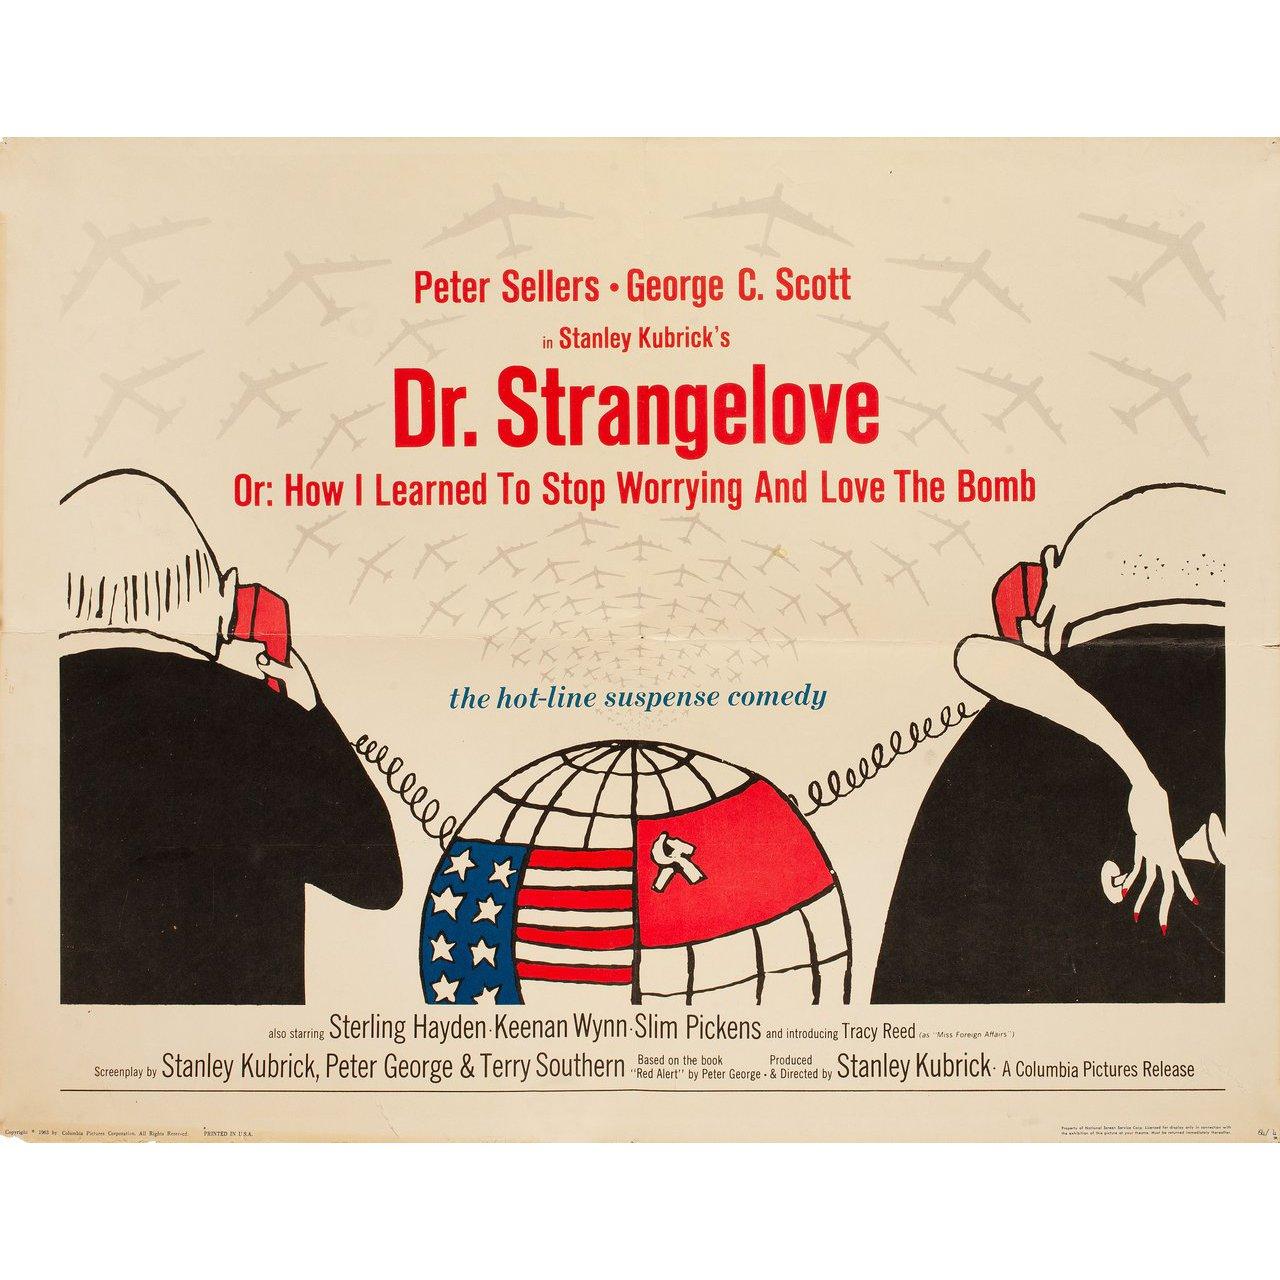 Original 1964 U.S. half sheet poster by Tomi Ungerer for the film Dr. Strangelove (Dr. Strangelove or: How I Learned to Stop Worrying and Love the Bomb) directed by Stanley Kubrick with Peter Sellers / George C. Scott / Sterling Hayden / Keenan